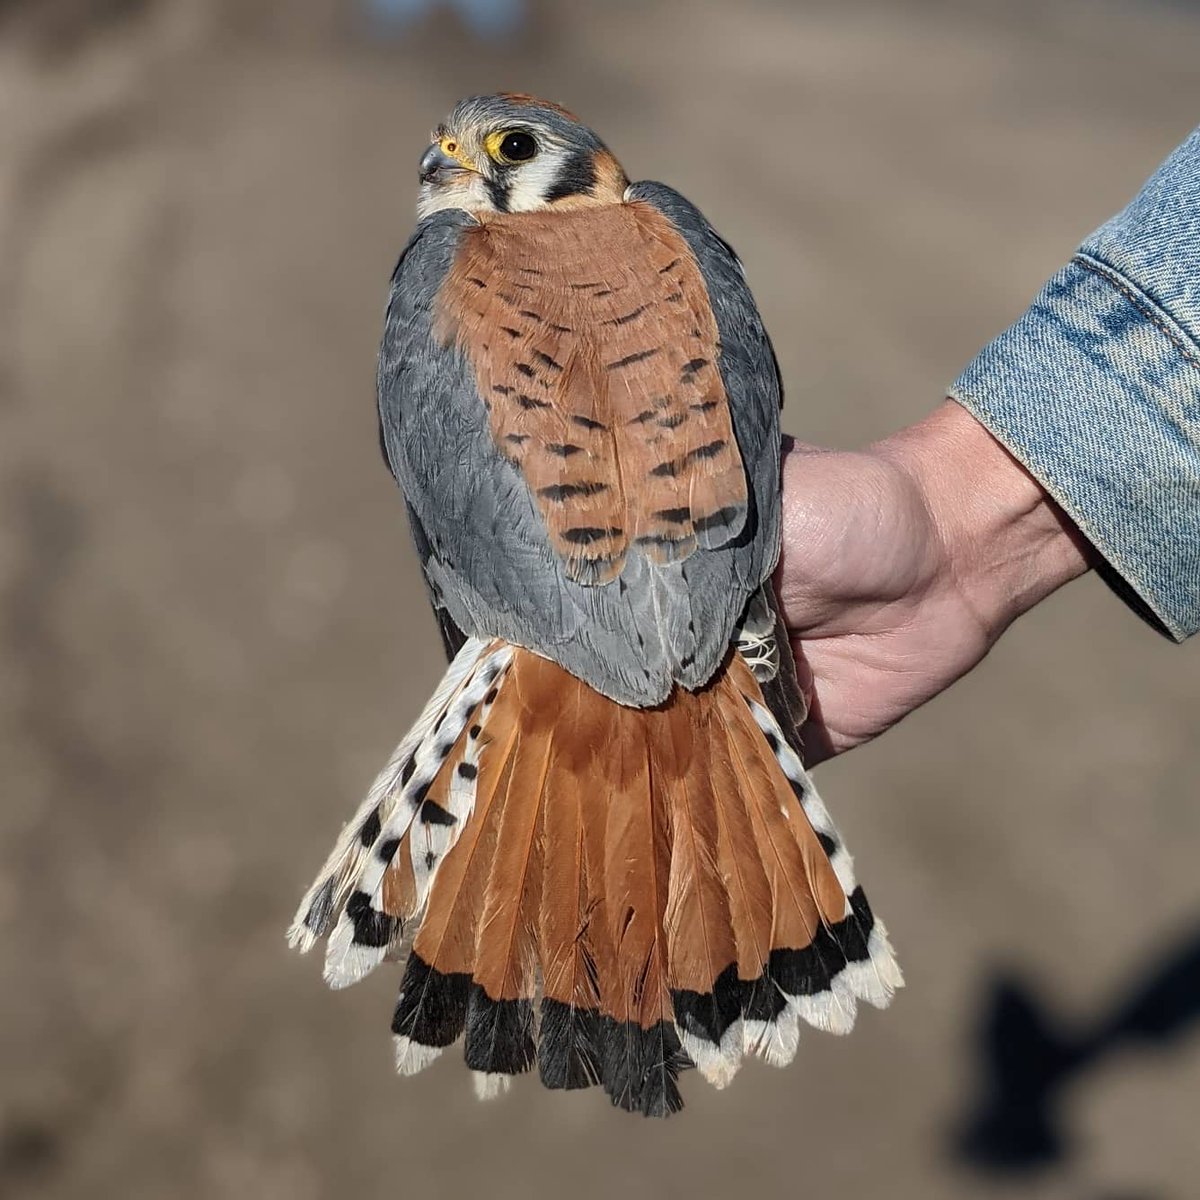 Nice to get out for some #americankestrel banding today. The highlight was recapturing a female (left), an individual that we banded as a nestling back in 2015!